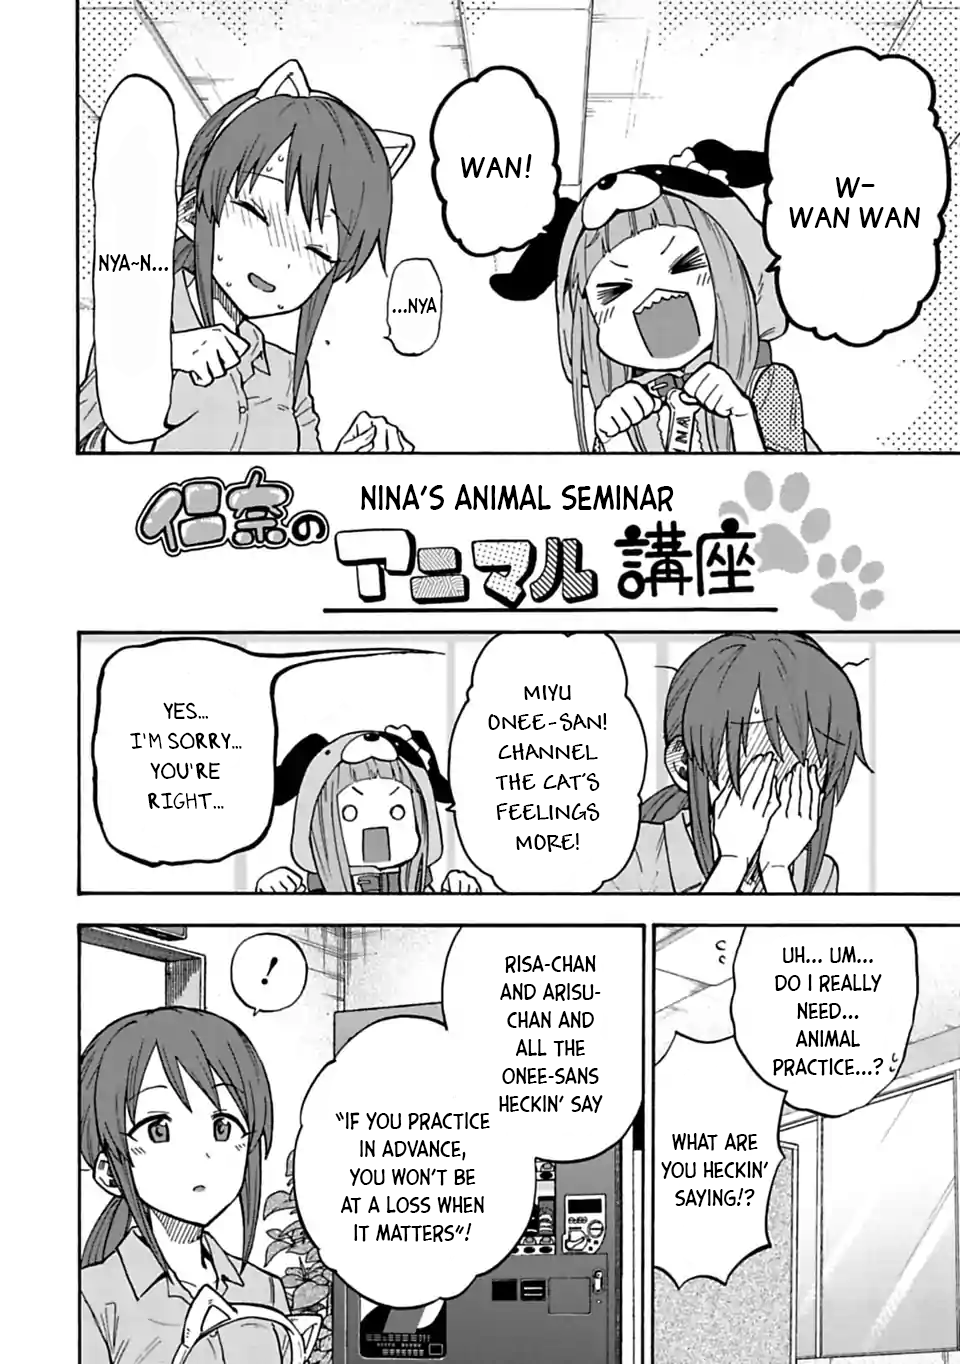 The Idolm@ster Cinderella Girls - U149 Chapter 69.5: Special Compilation - Nina's Animal Seminar - Picture 2